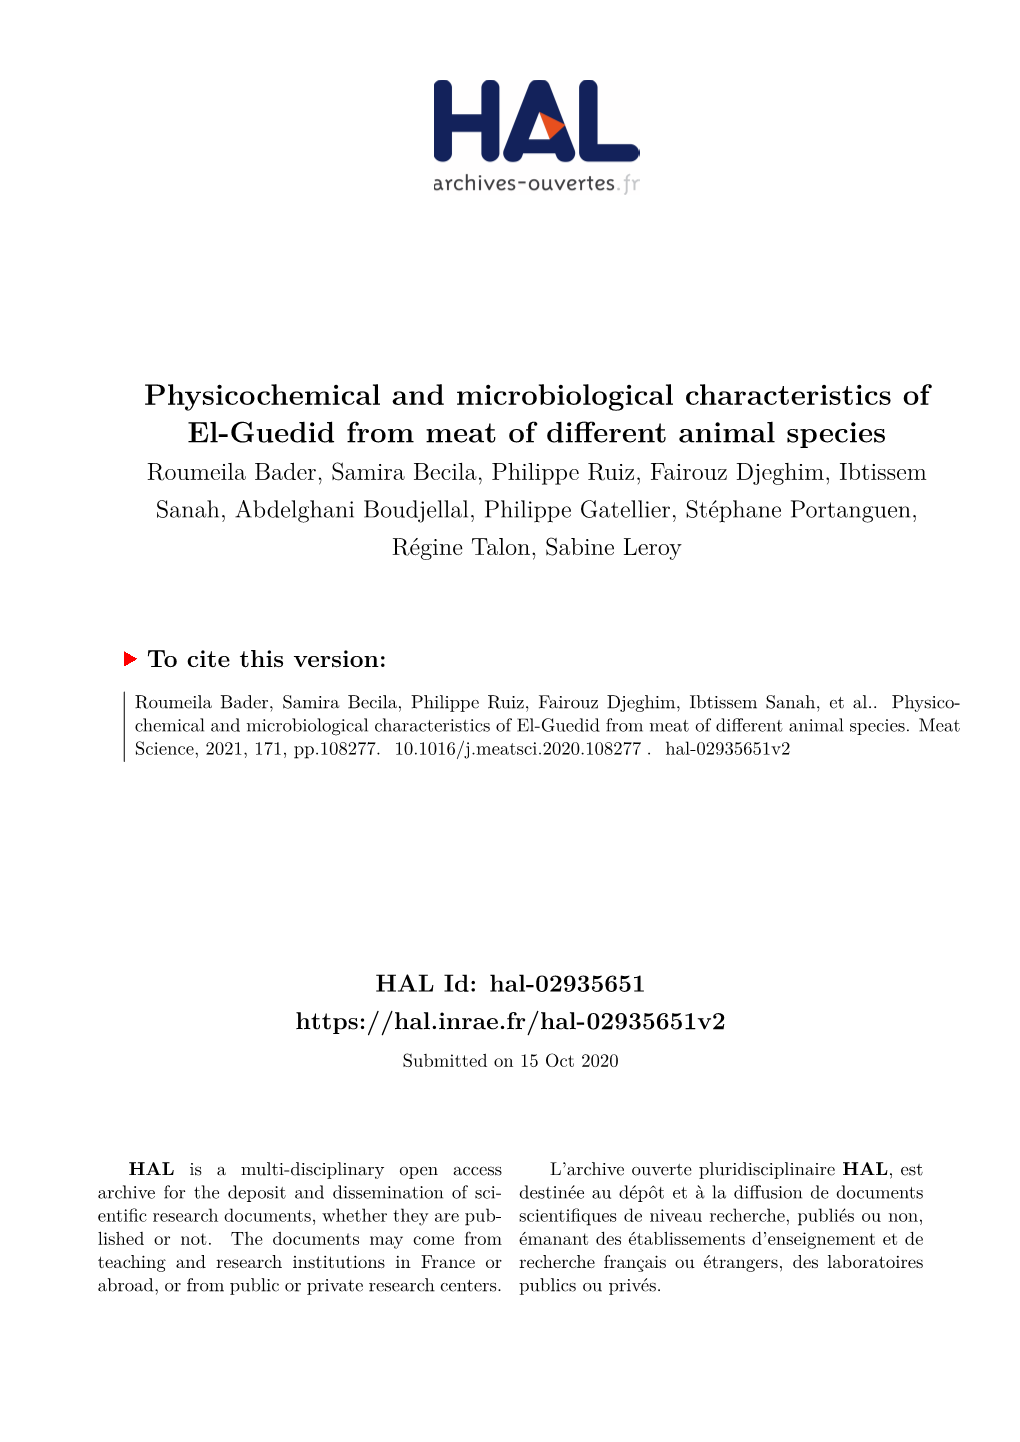 Physicochemical and Microbiological Characteristics of El-Guedid From